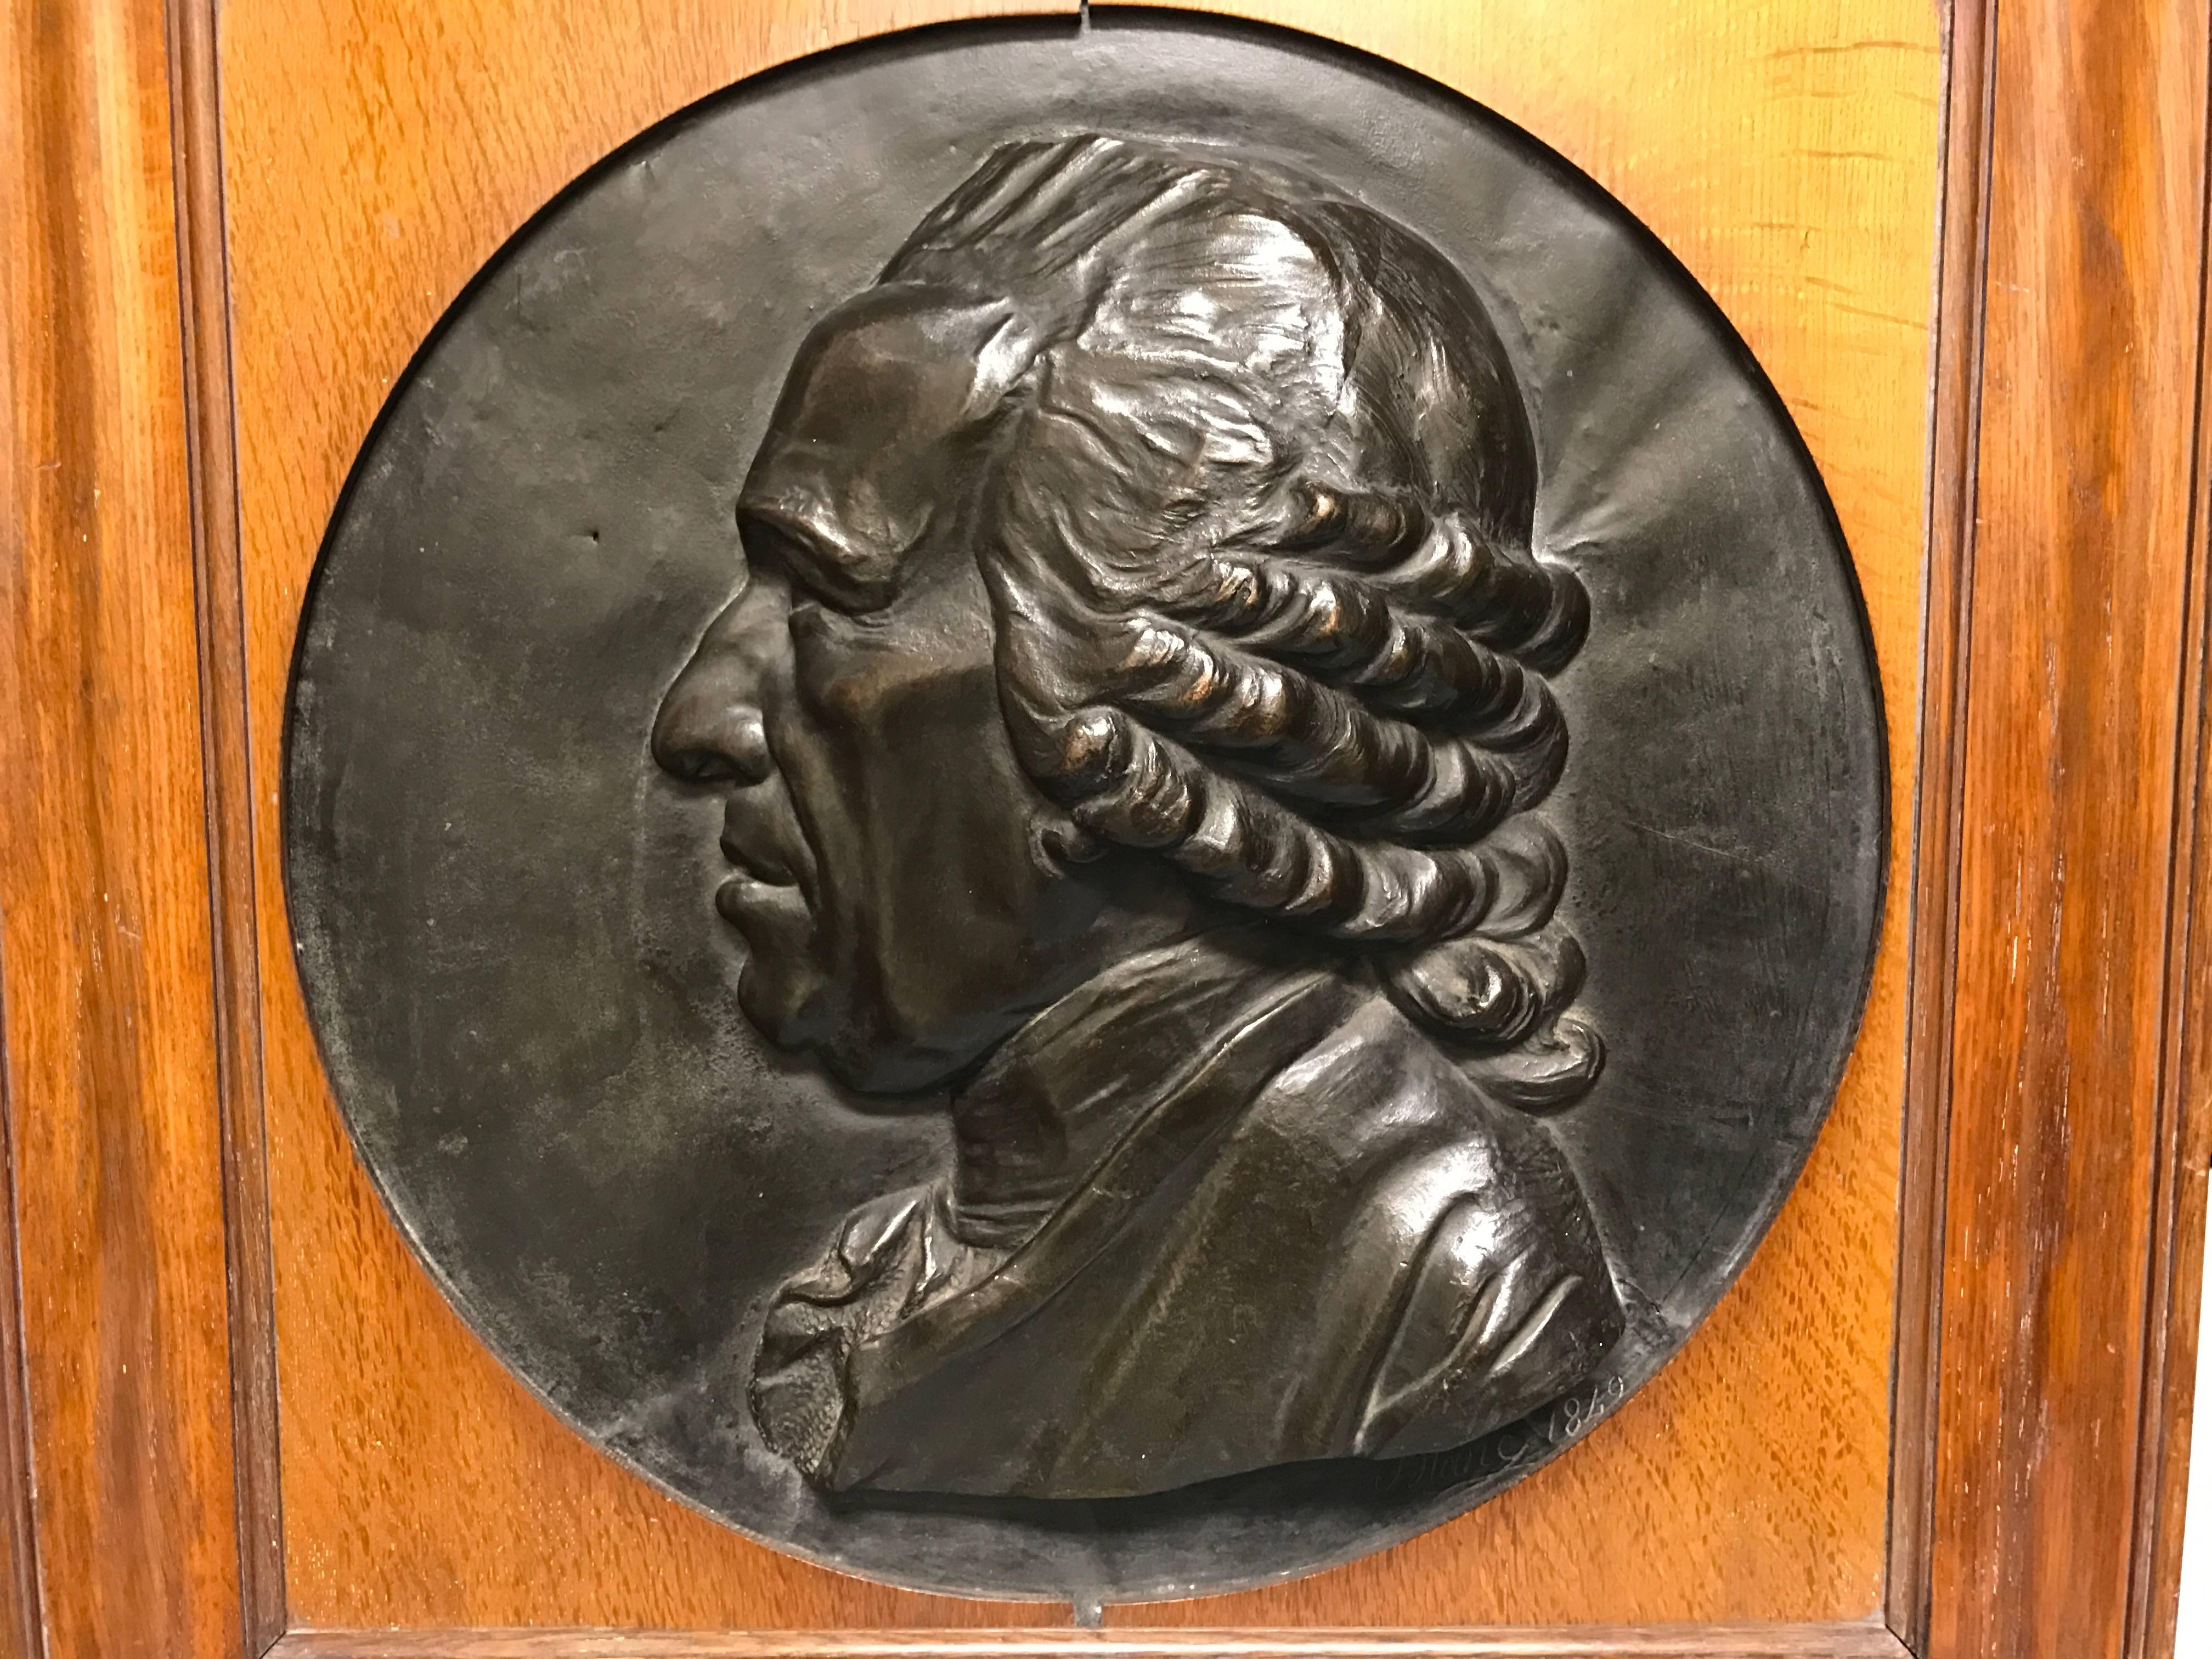 A portrait bust in relief of a French luminary or nobleman in copper repousse with a rich black patina. Mounted in the original oak frame. Signed and dated 'Blanc 1849'. 

Armand Blanc was a sculptor born in Dijon; died c. 1860. A pupil of David